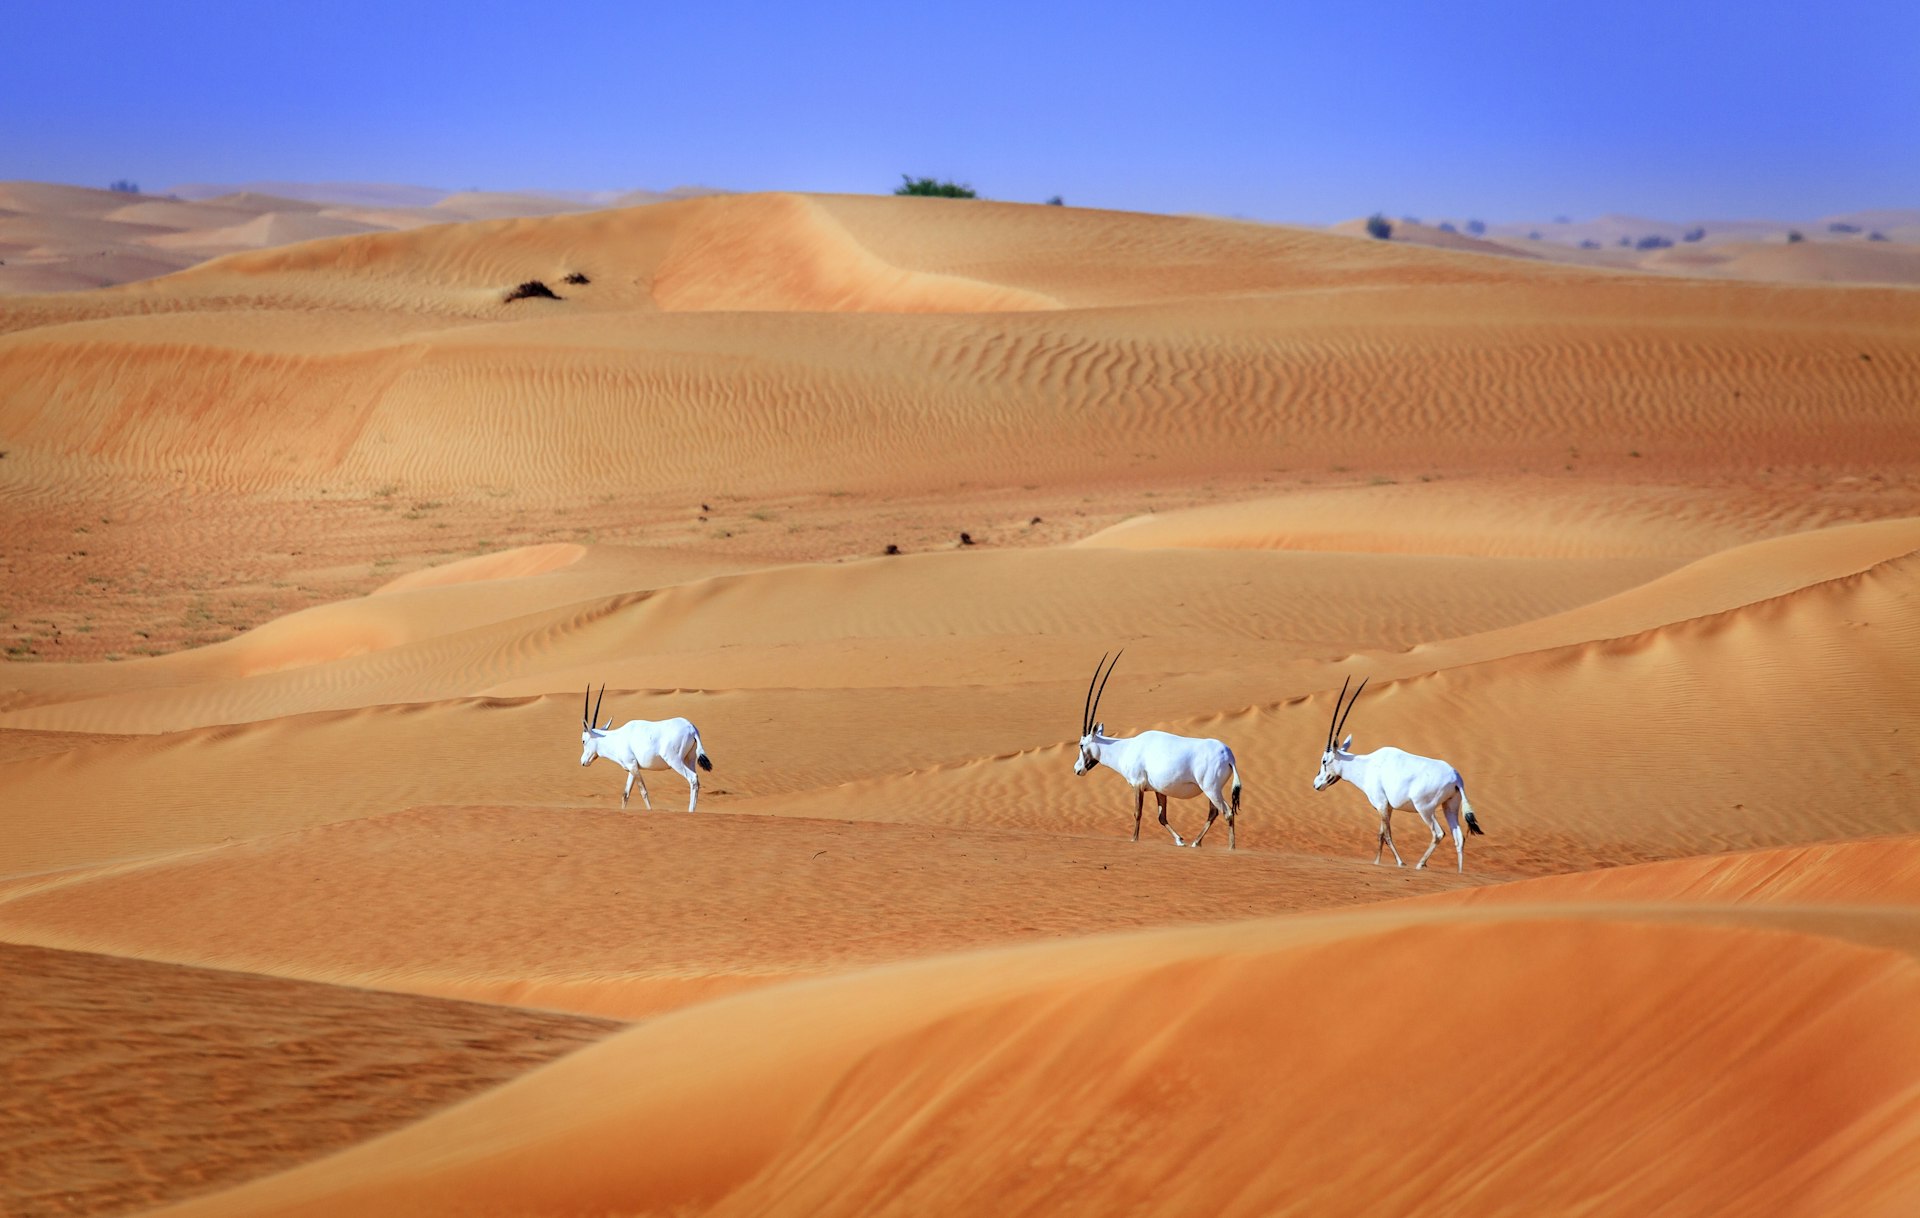 Oryxes (also called Arabian gazelle) stride through the Dubai Desert Conservation Reserve. Image by alexeys / Getty Images